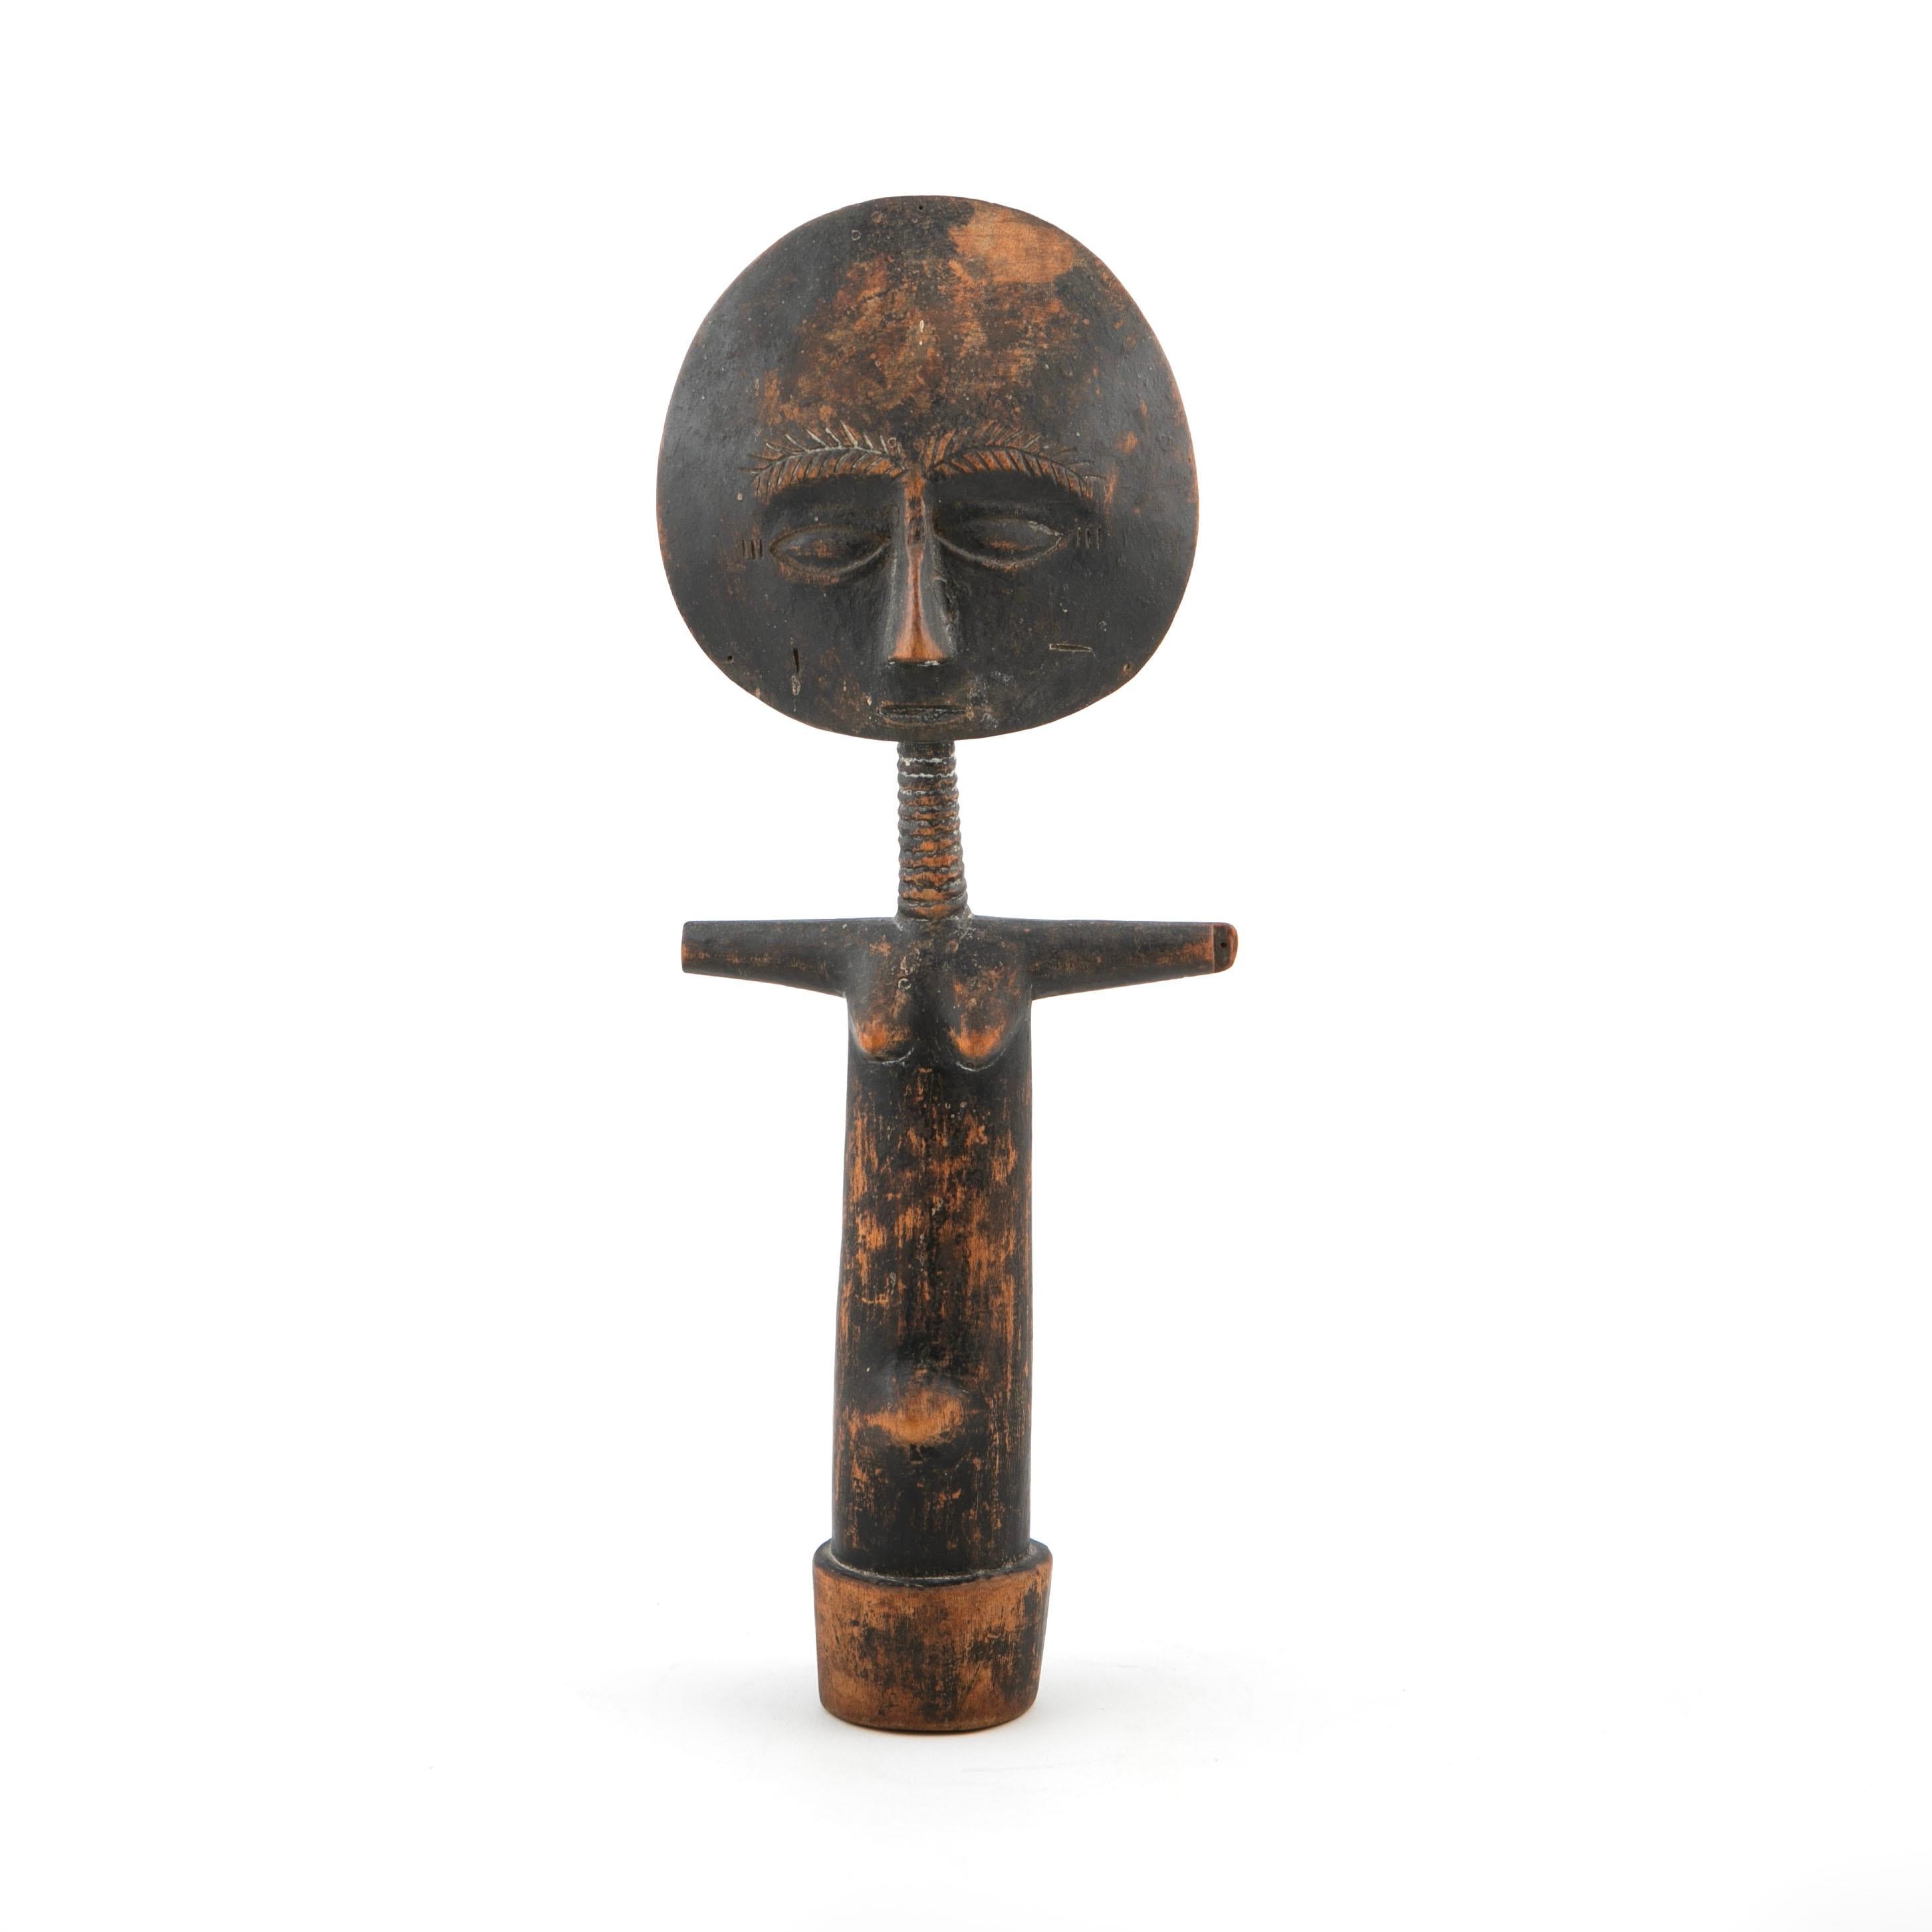 Carved wood Akuaba, sometimes known as an Ashanti doll or a Fanti doll.
Untouched condition with a beautiful natural age-related patina.
Akua'ba (sometimes spelled Akwaba or Akuba) are wooden ritual fertility dolls from Southern Ghana and nearby